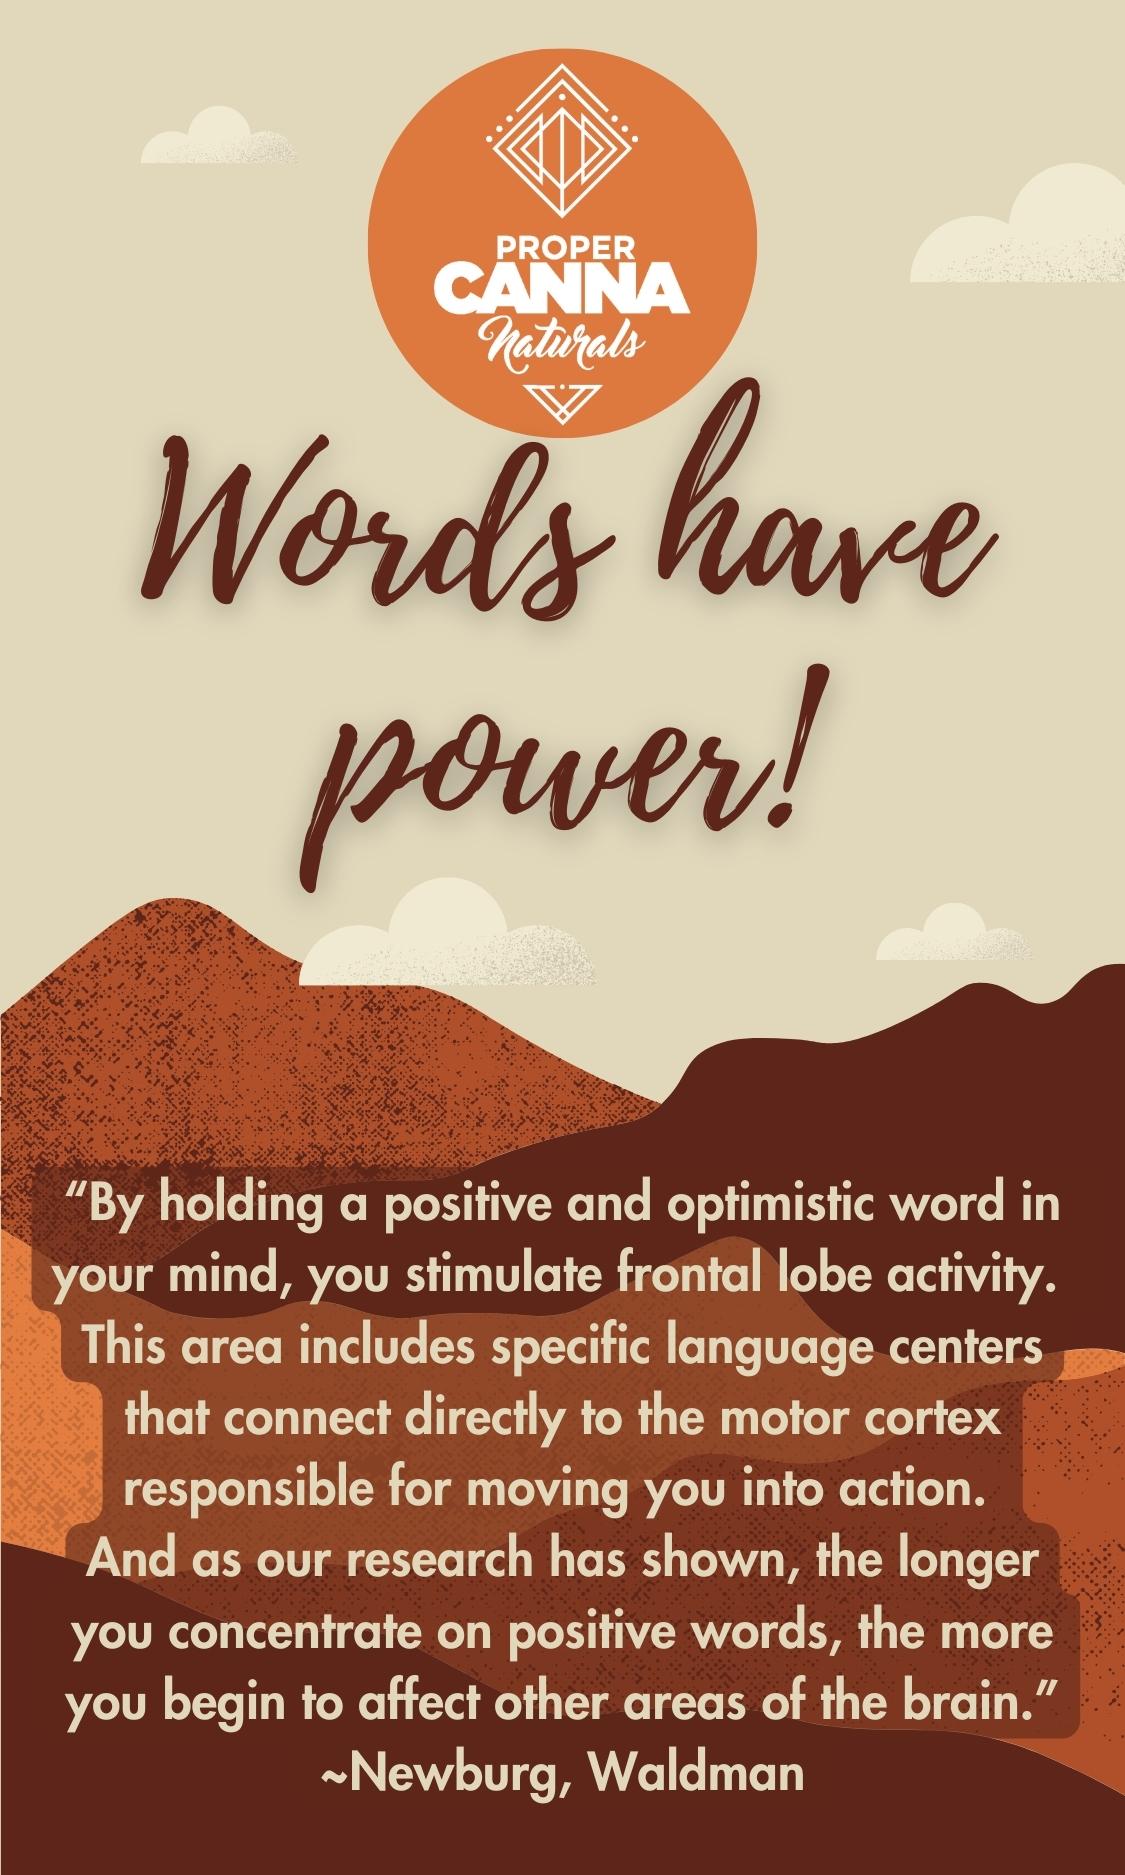 Your words have power1